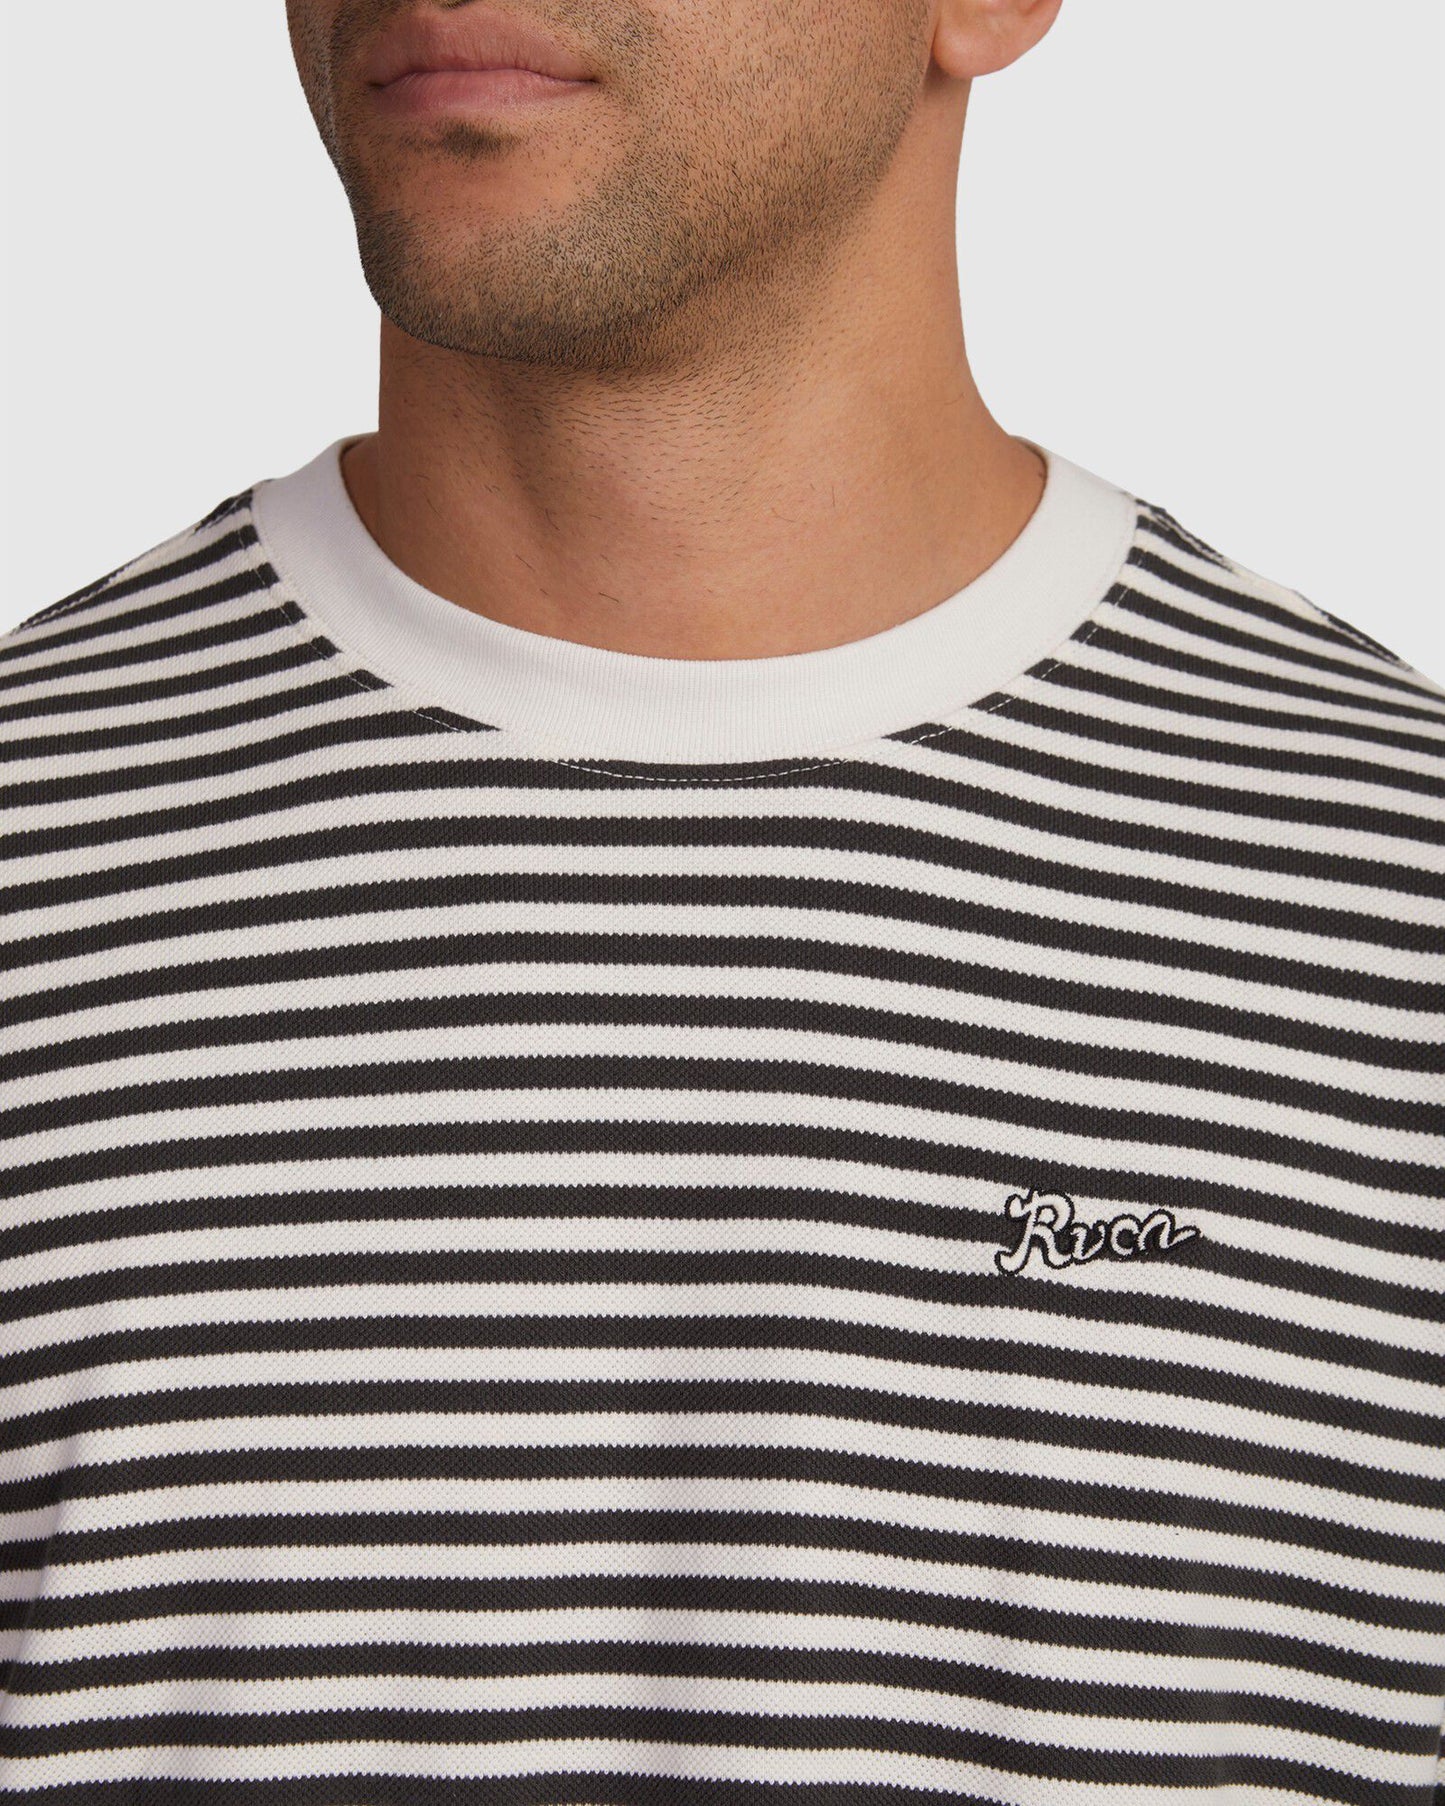 RVCA Alley Stripe Tee Washed Black